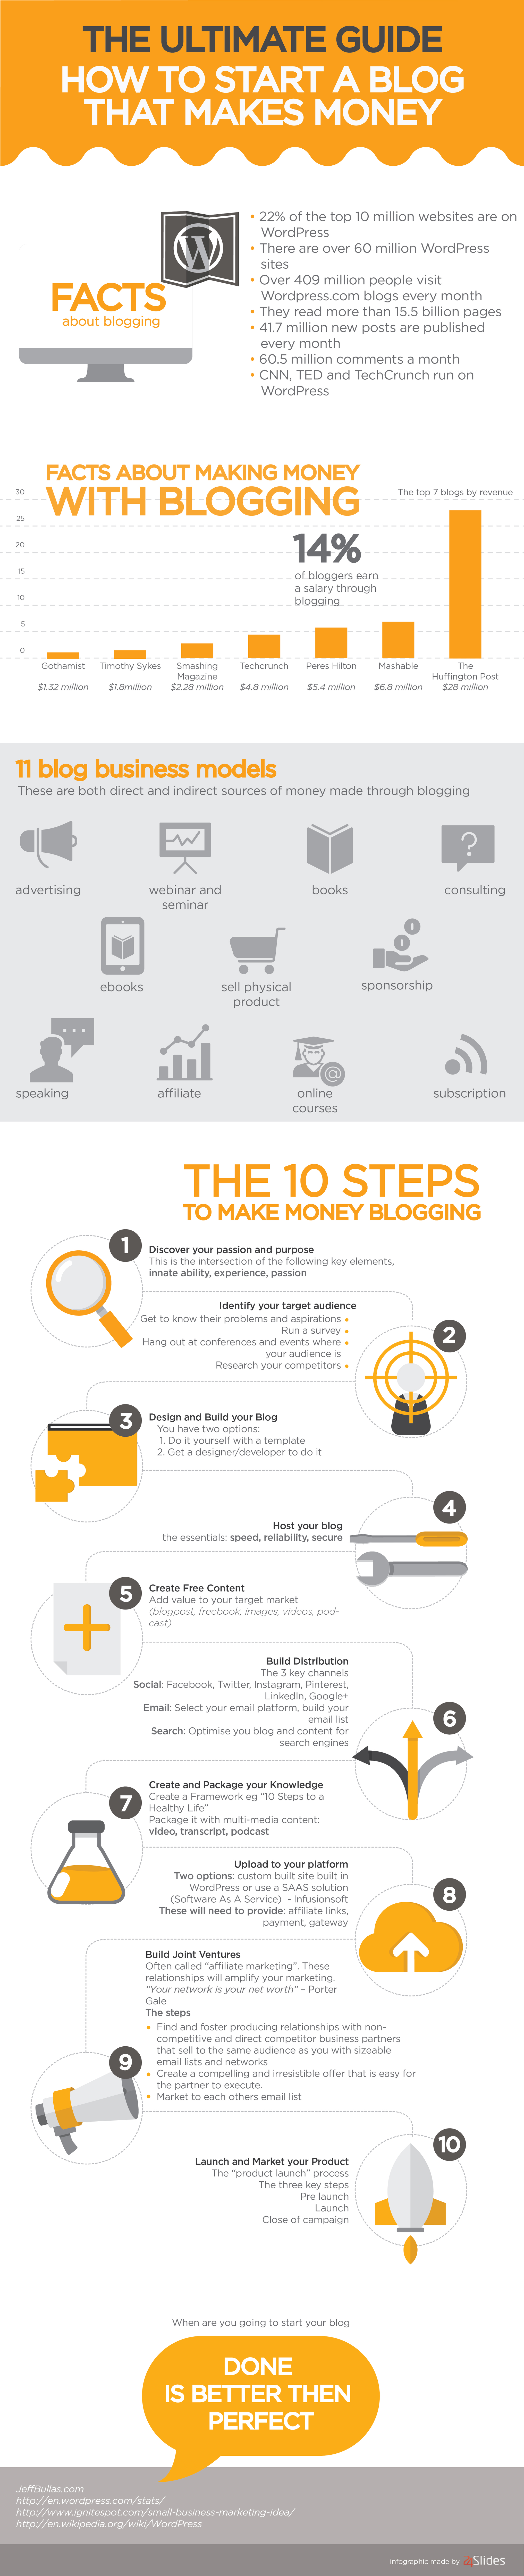 how to make money blogging from home